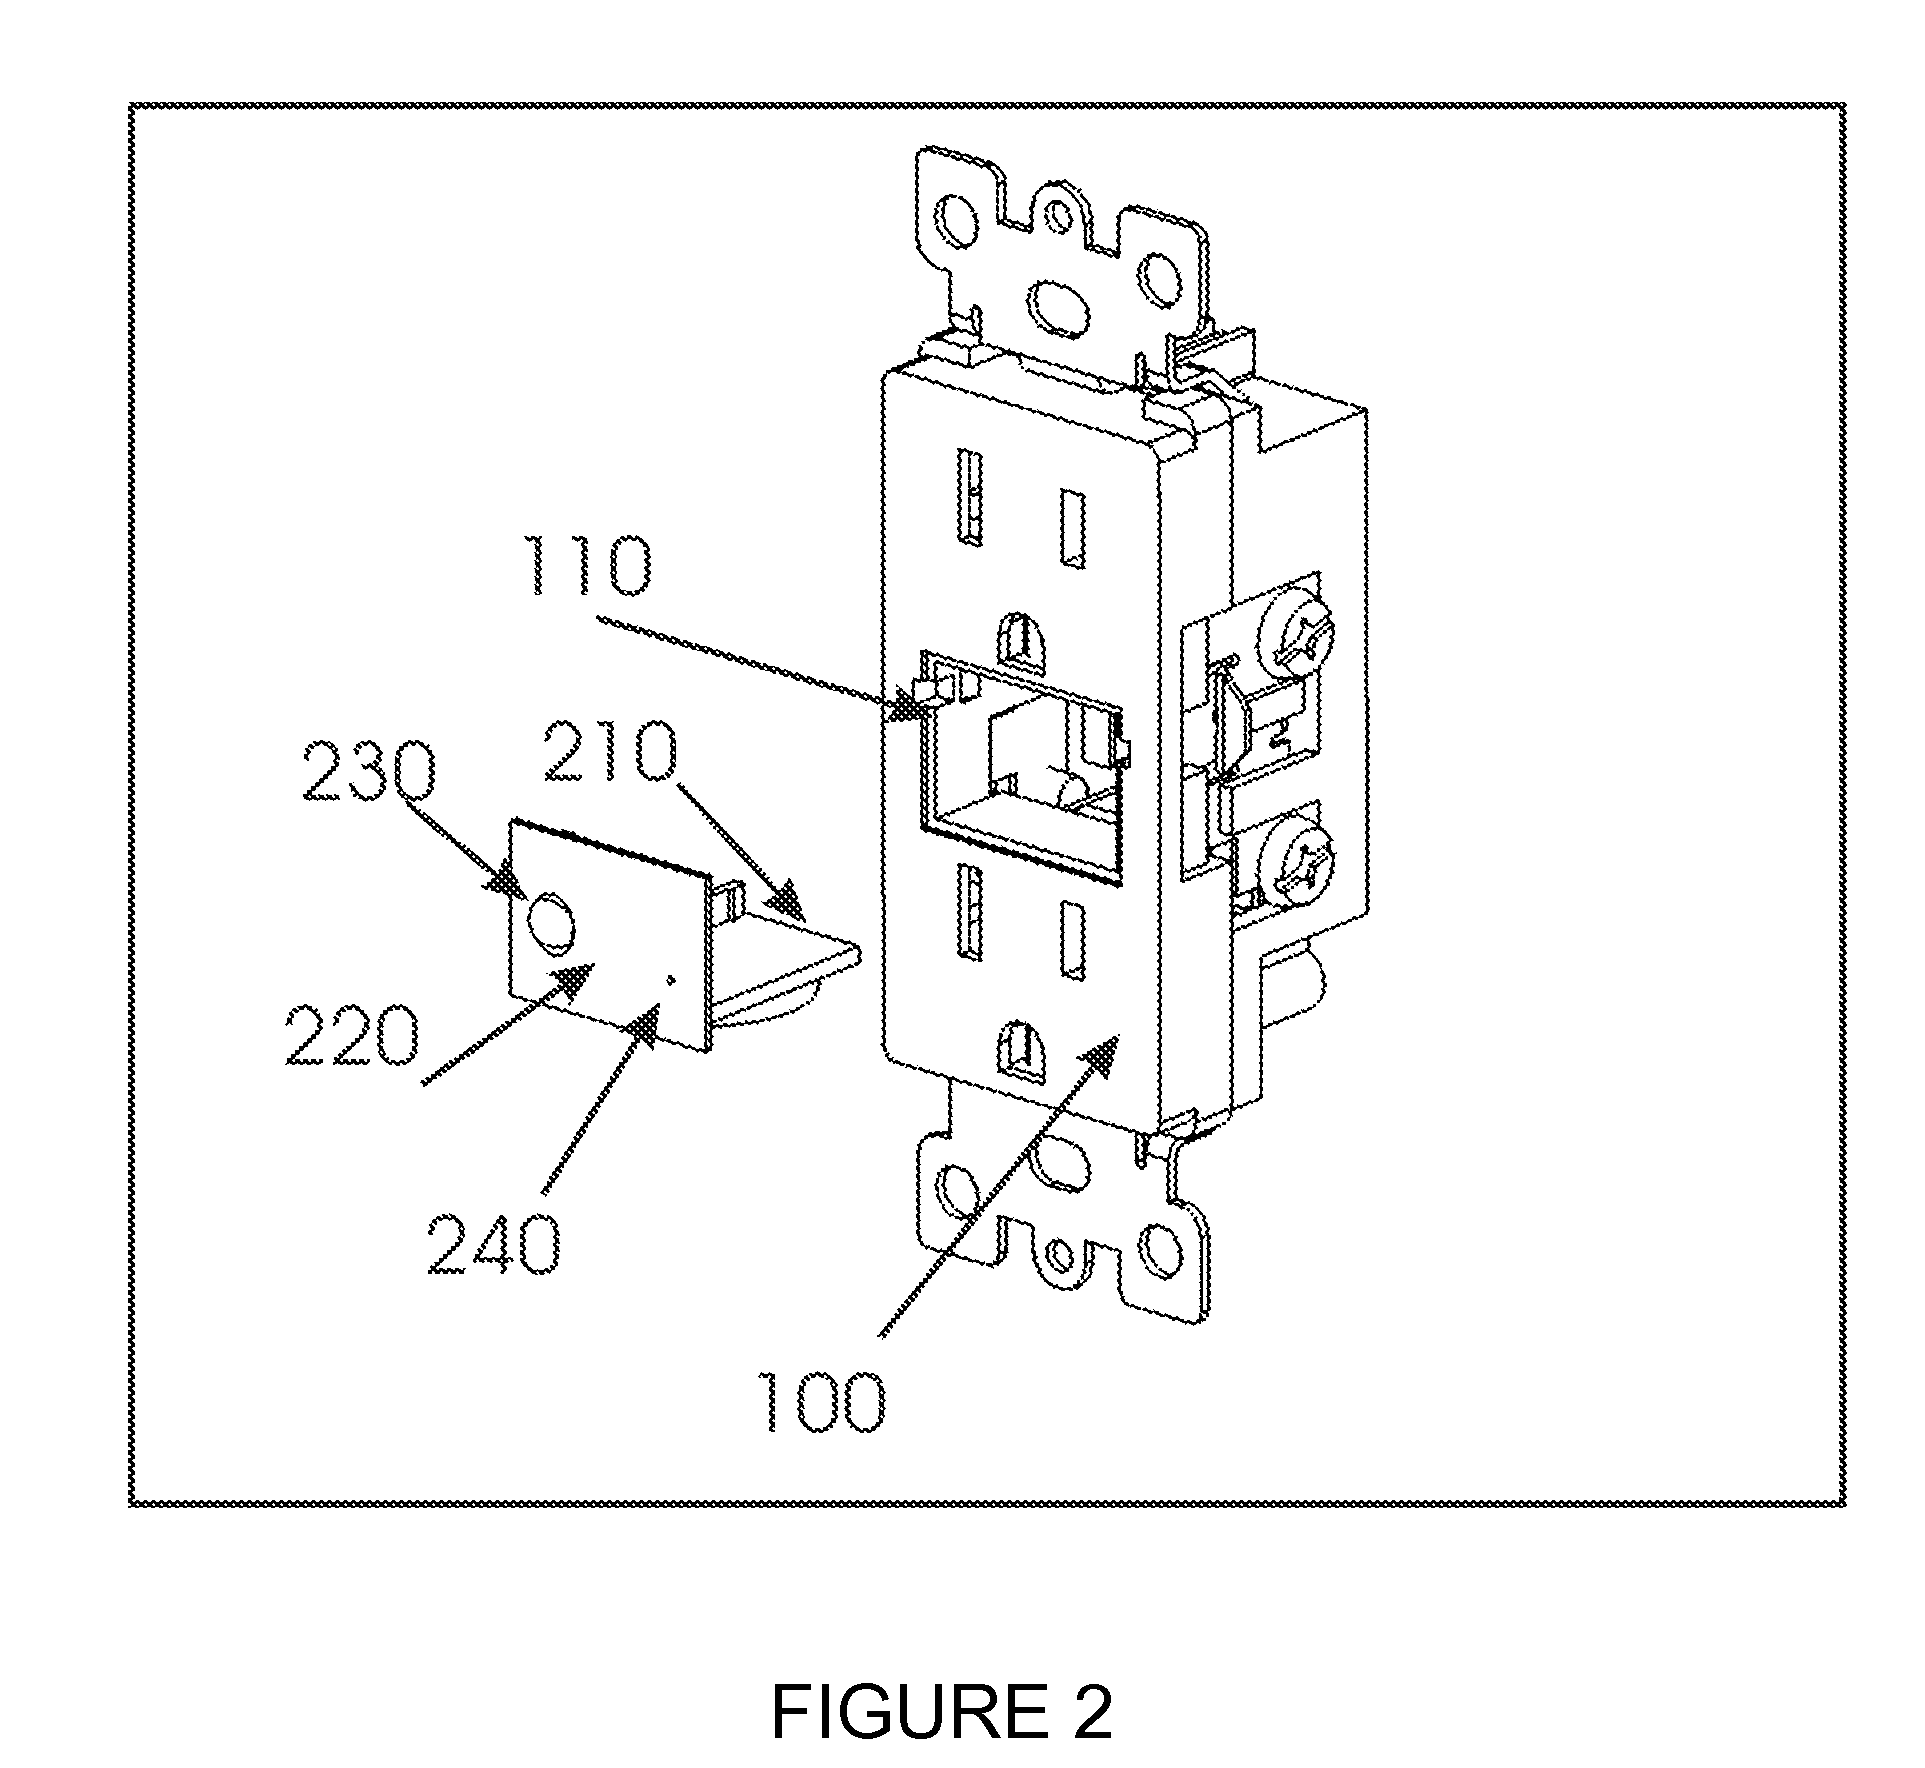 Configurable safety light receptacle